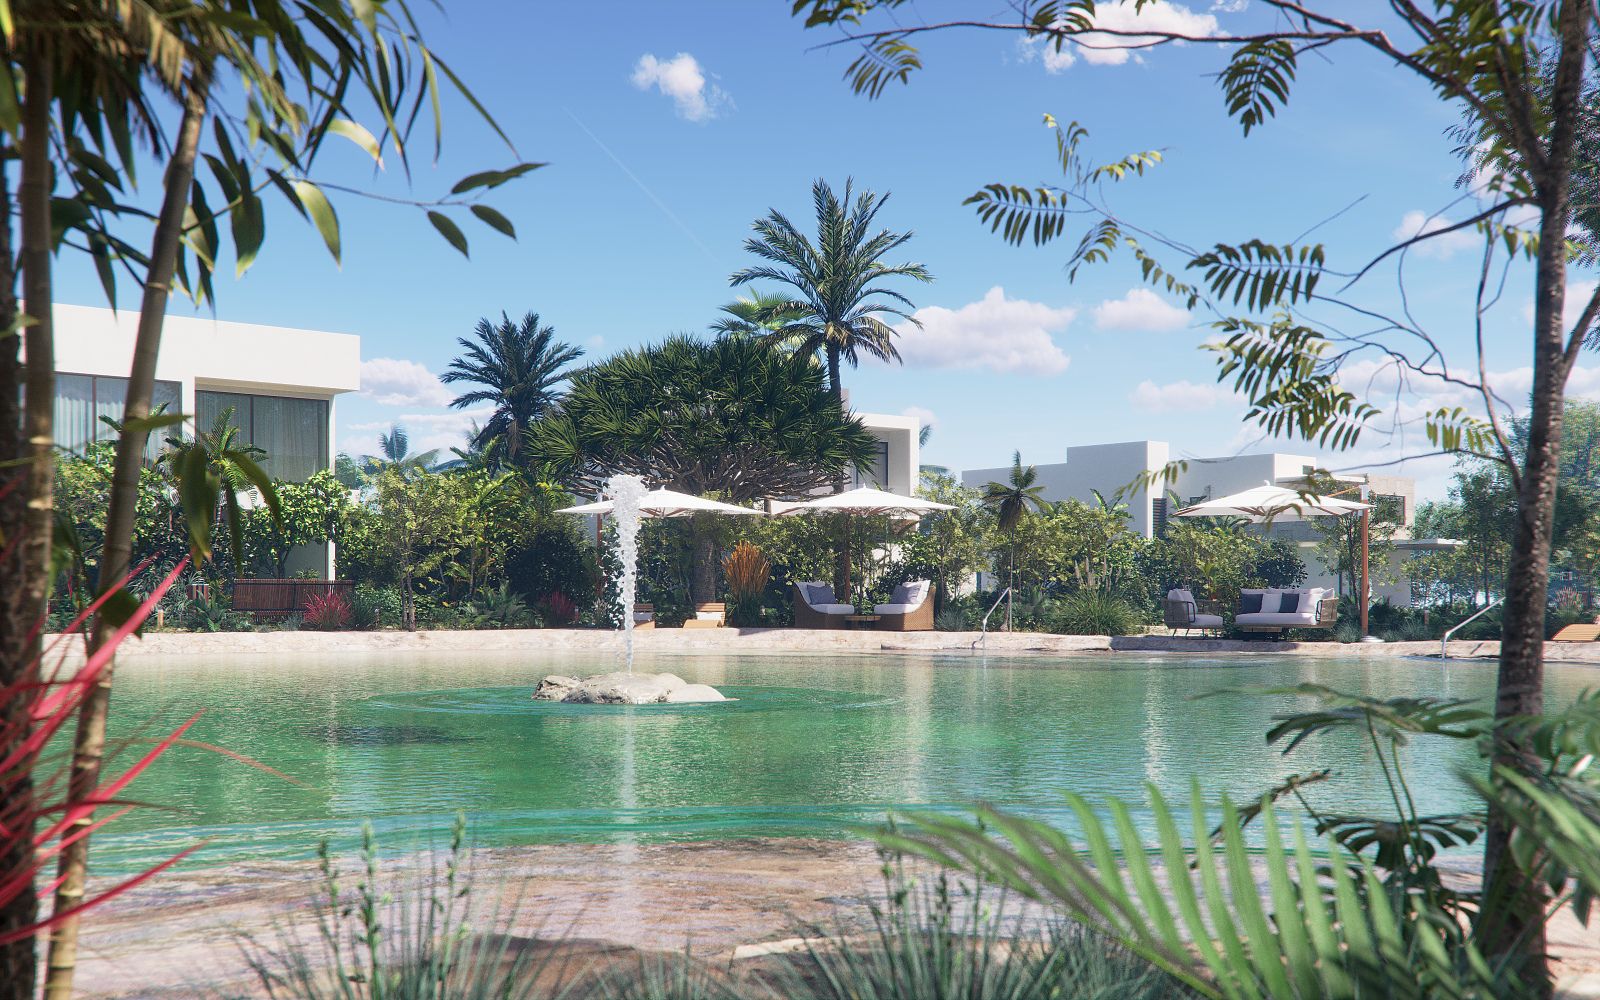 970 m2 lot, in gated community with private cenote, for sale Playa del Carmen.